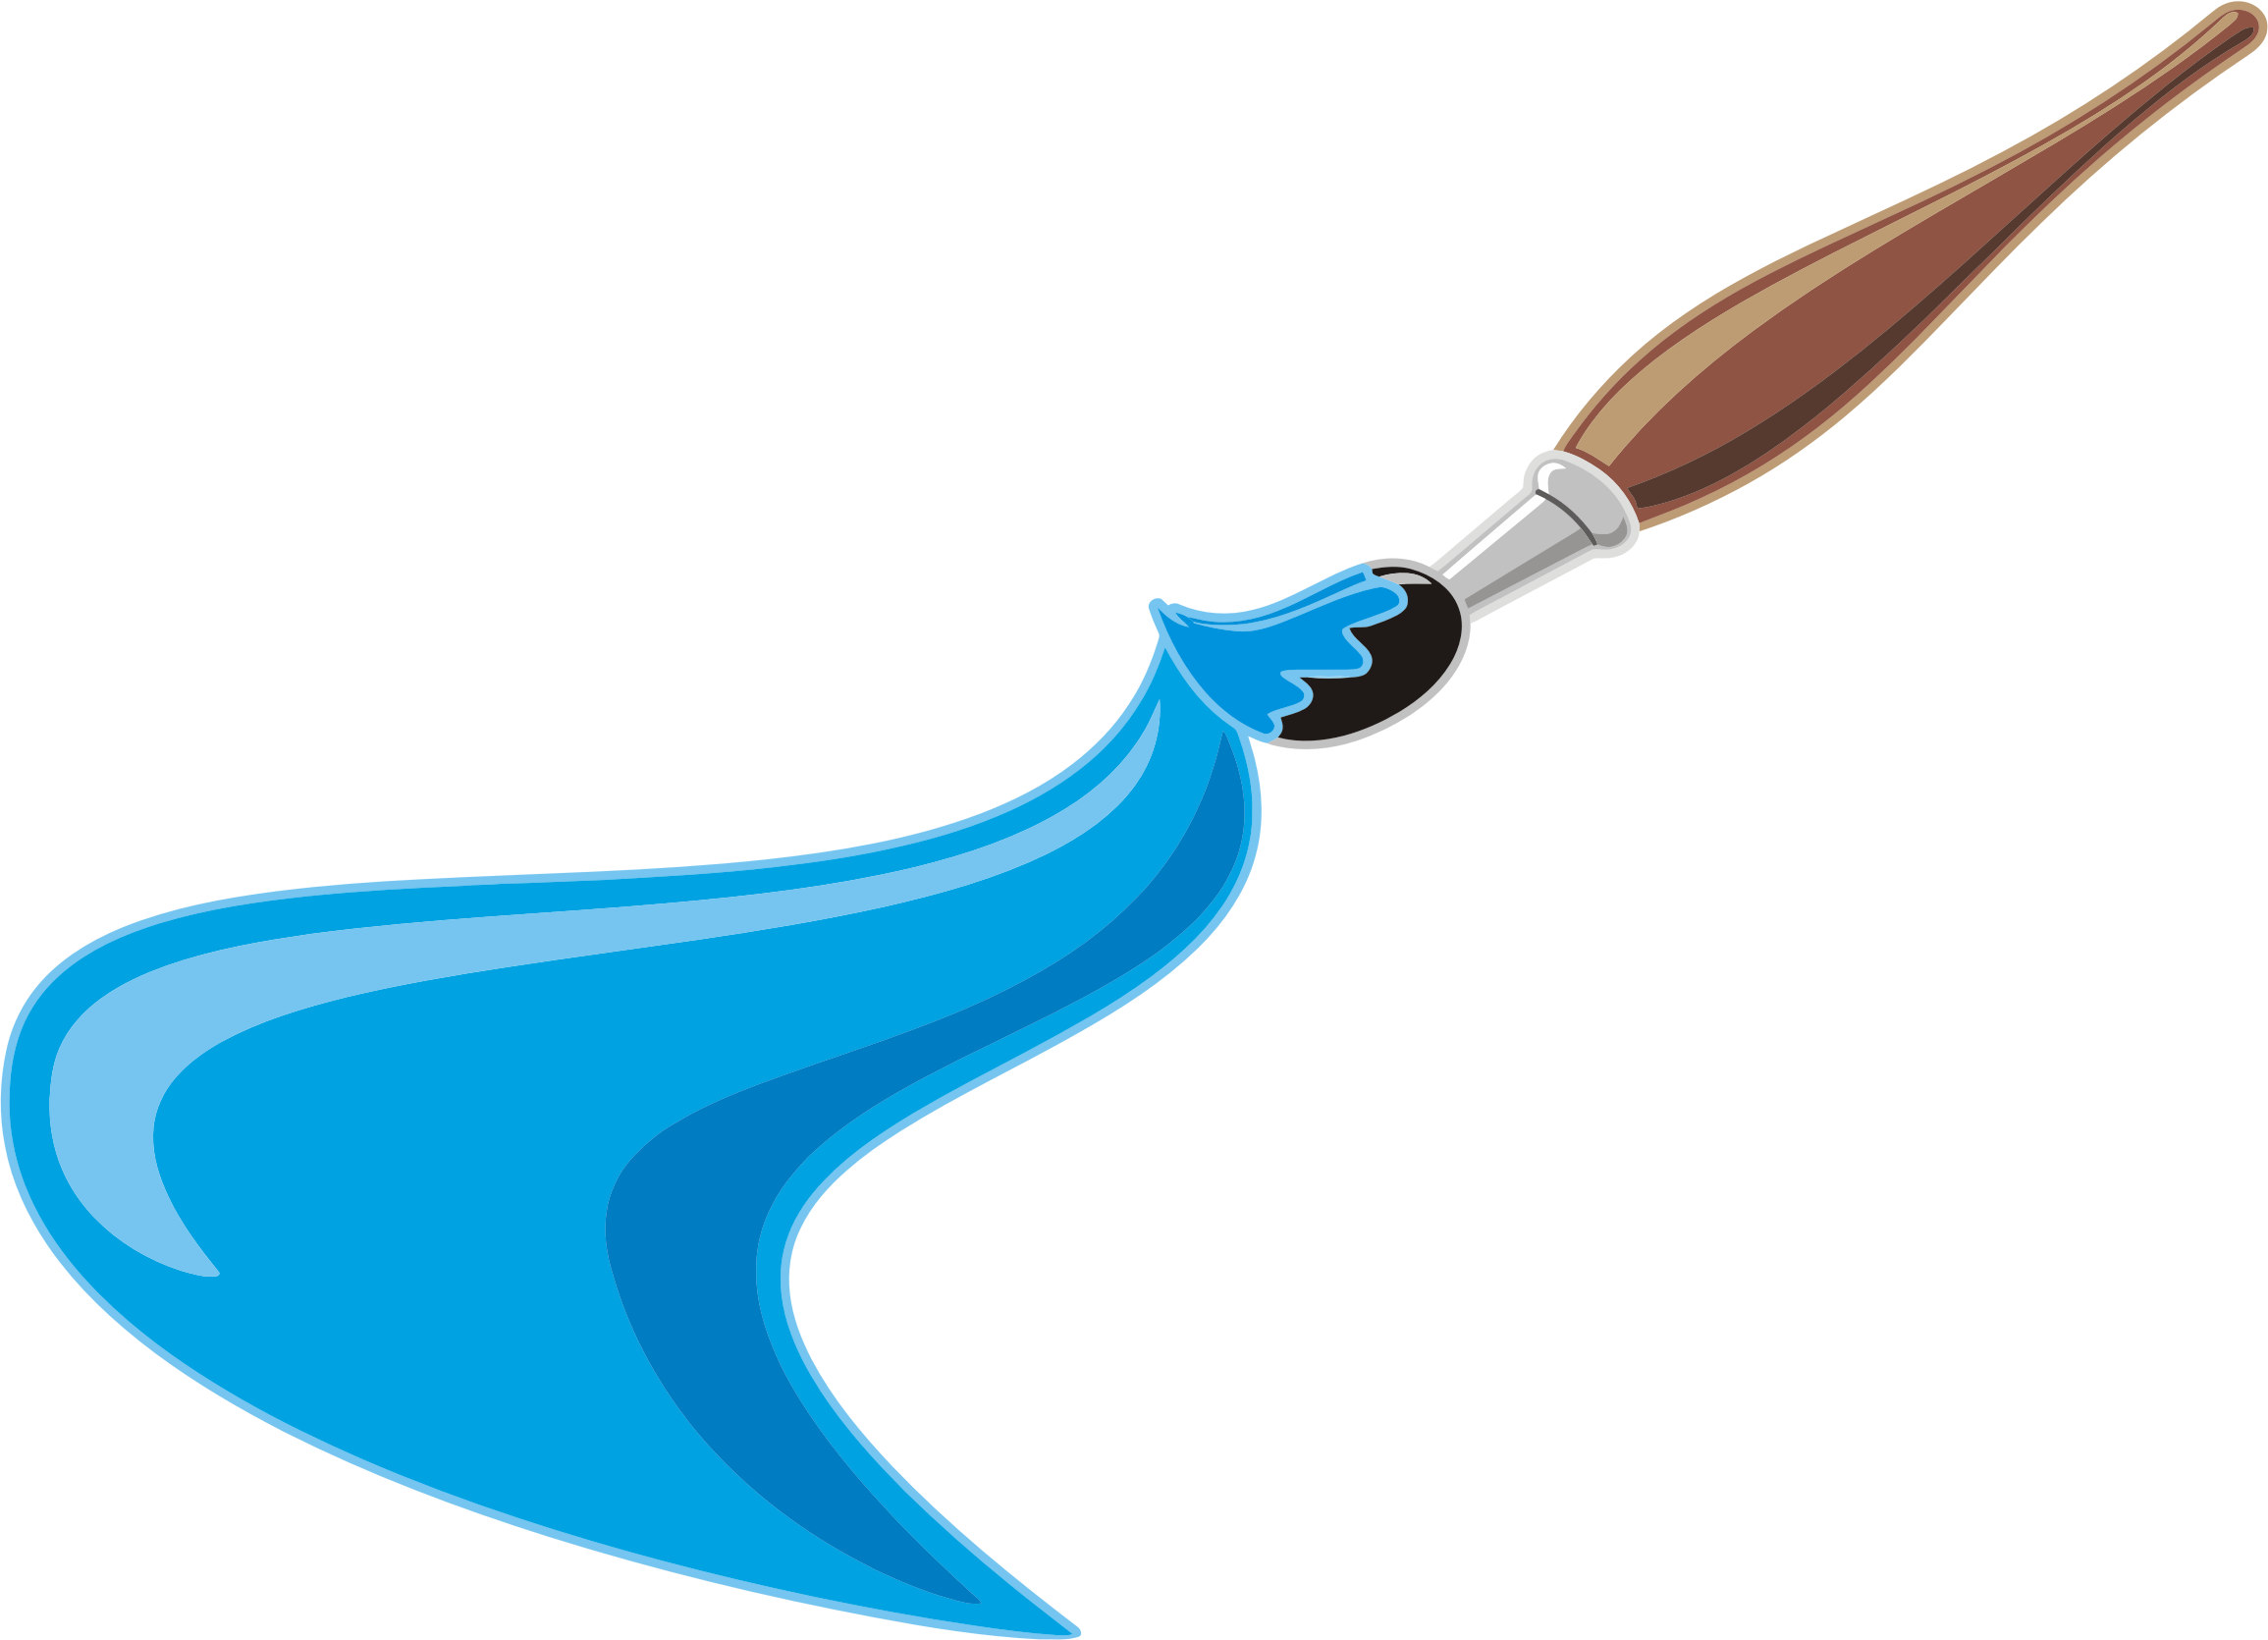 Blue clipart paintbrush pencil and in color blue